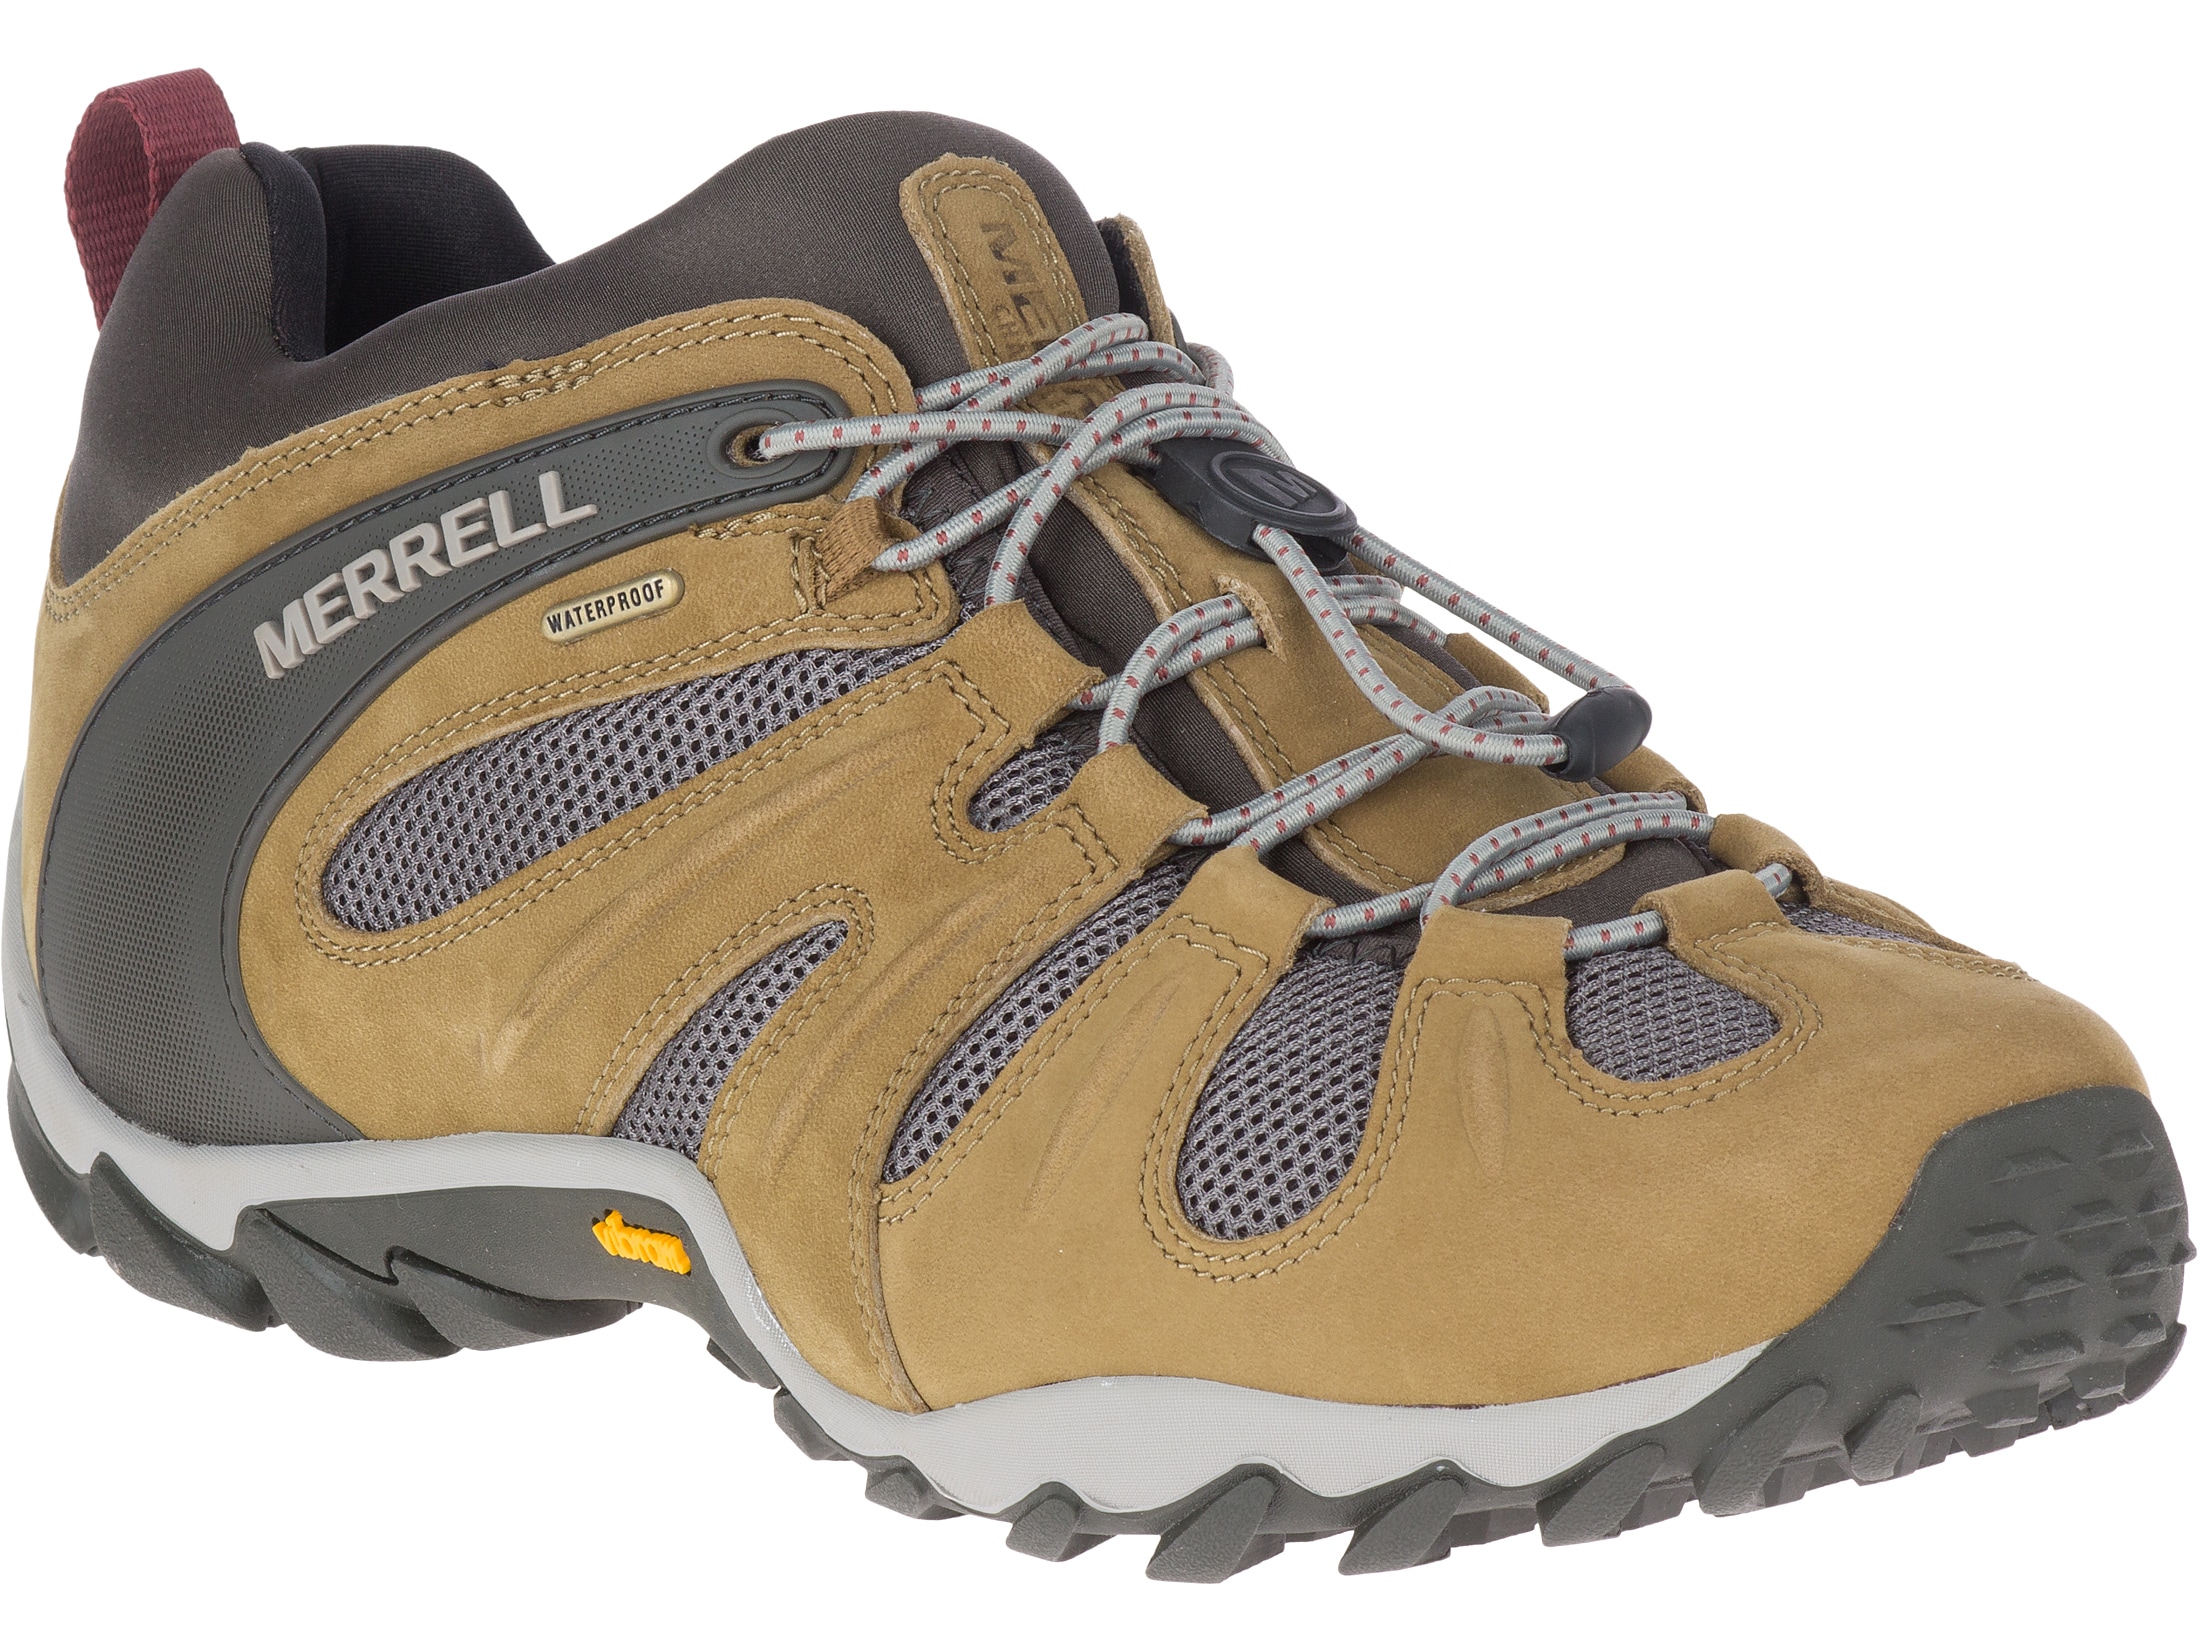 Merrell Chameleon 8 Stretch Waterproof Hiking Shoes Leather Charcoal